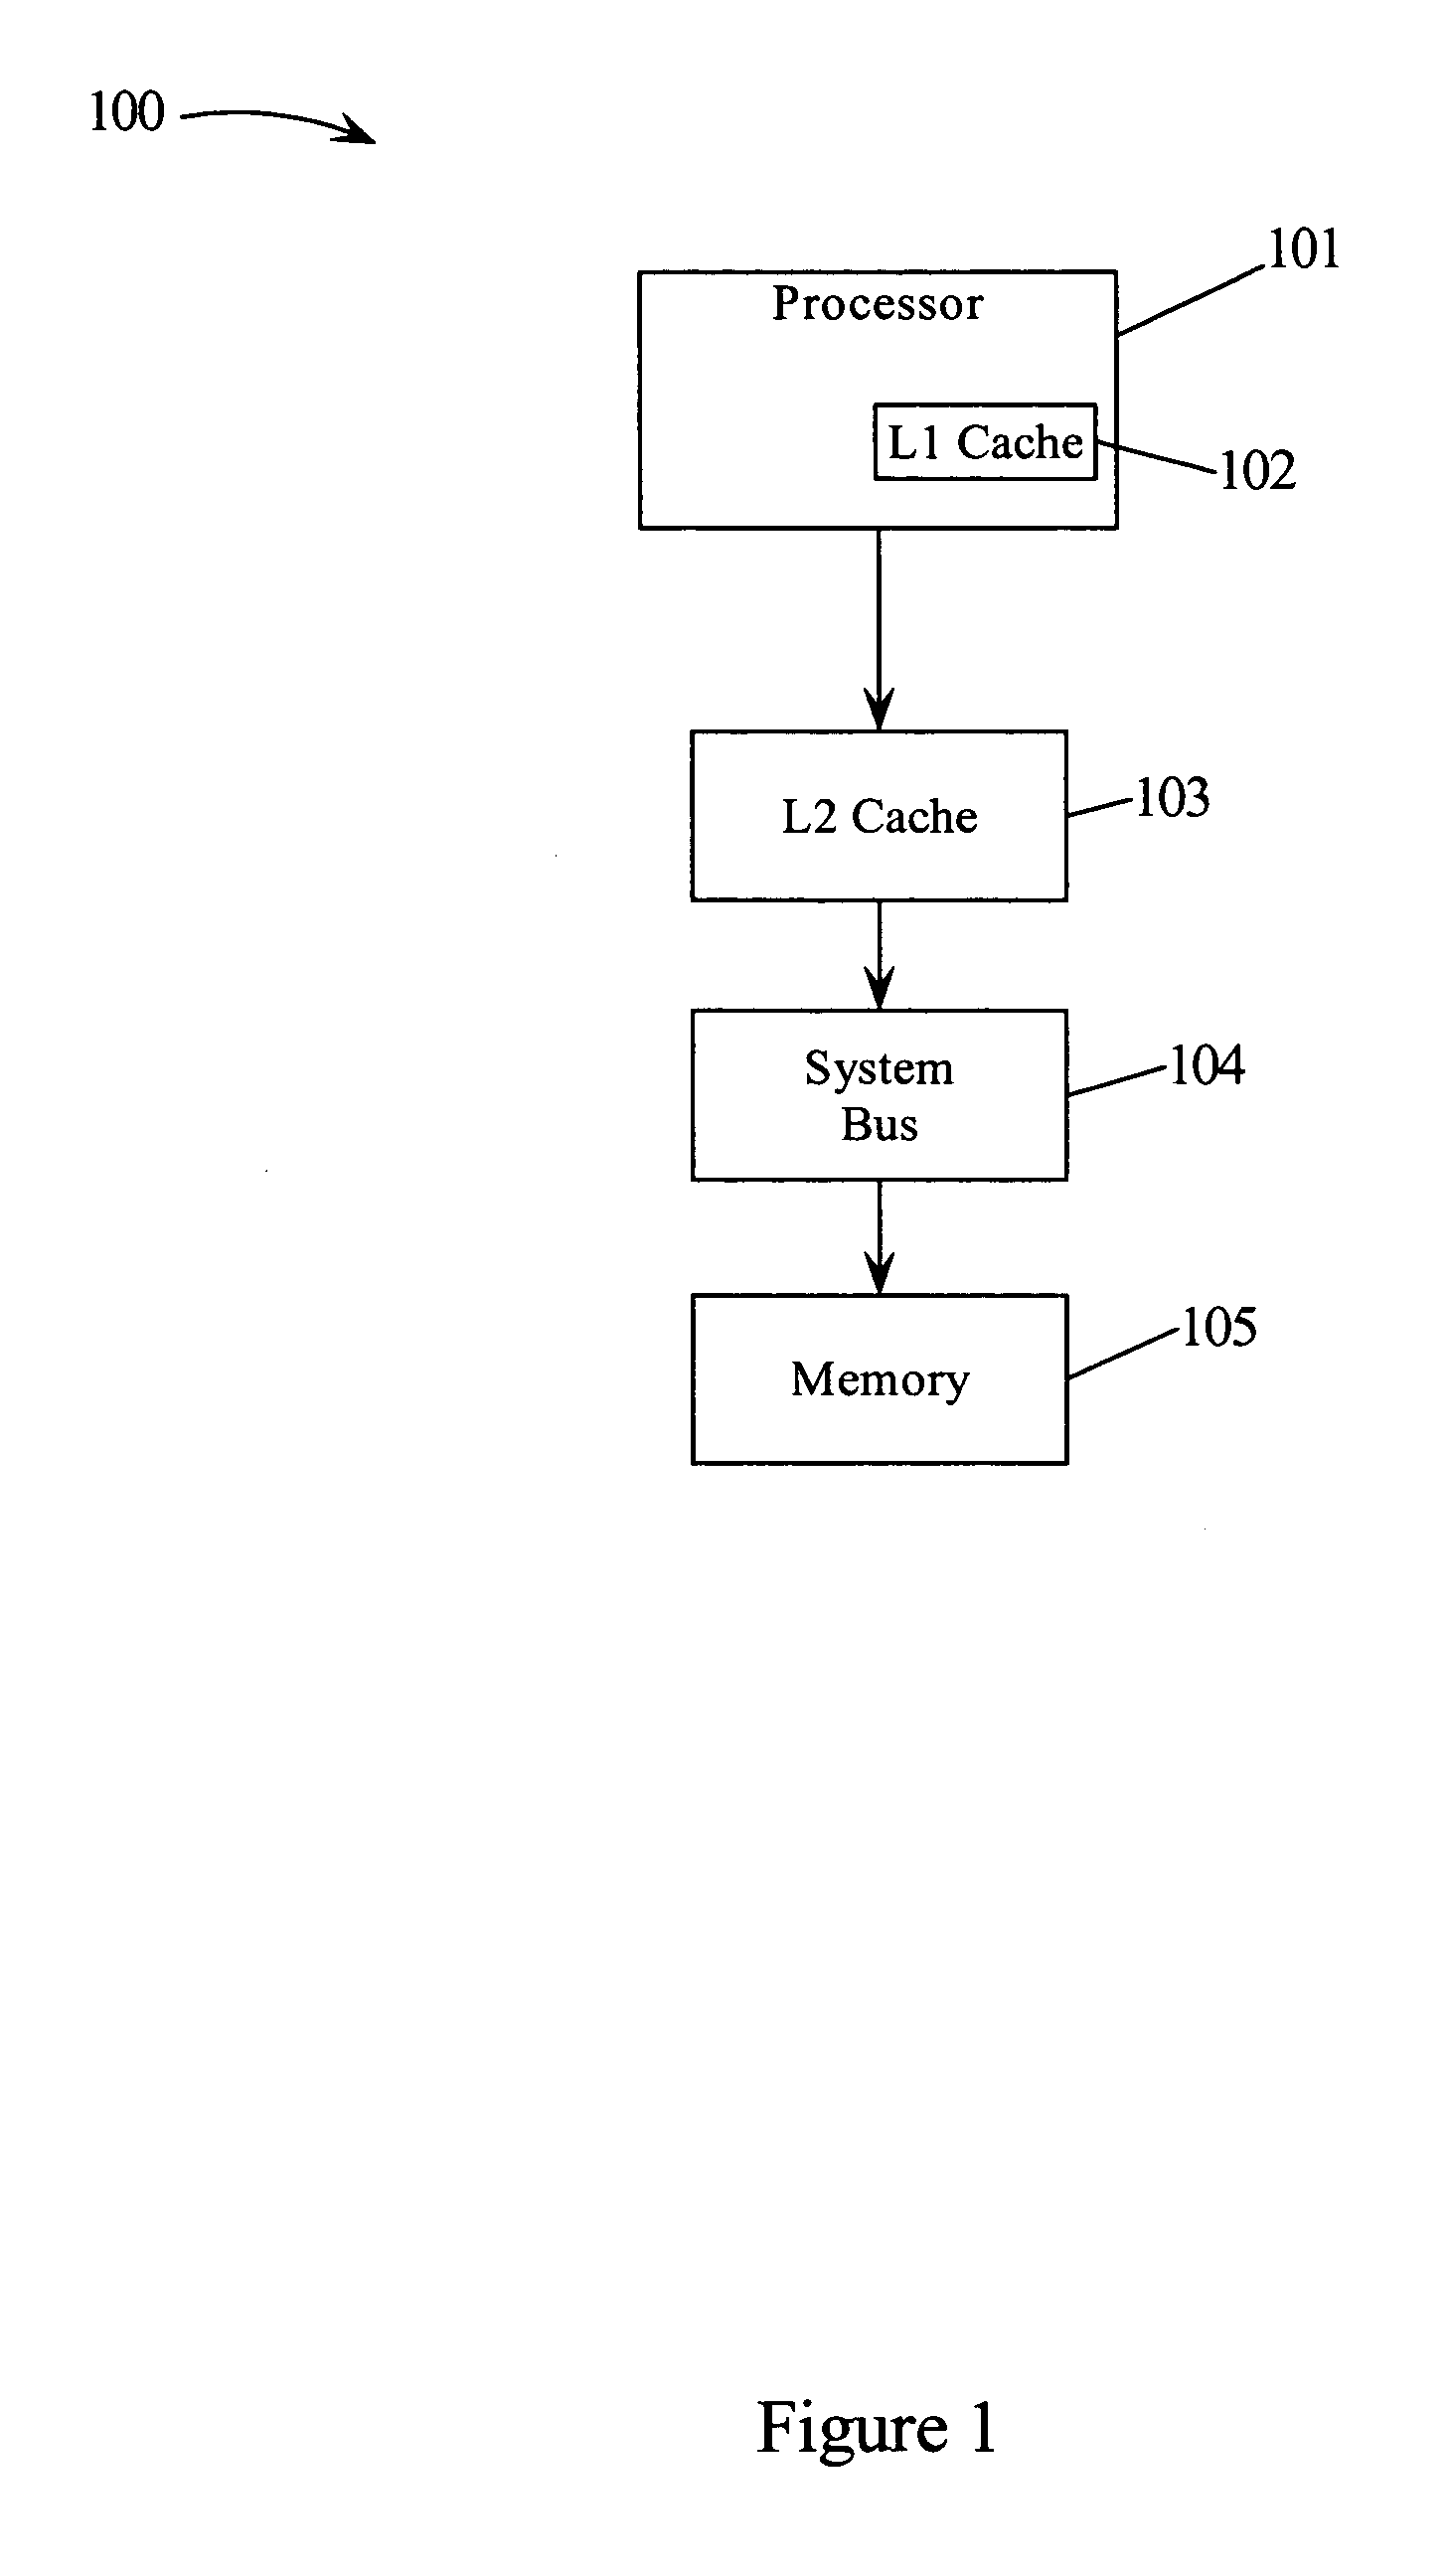 Performance of a cache by detecting cache lines that have been reused